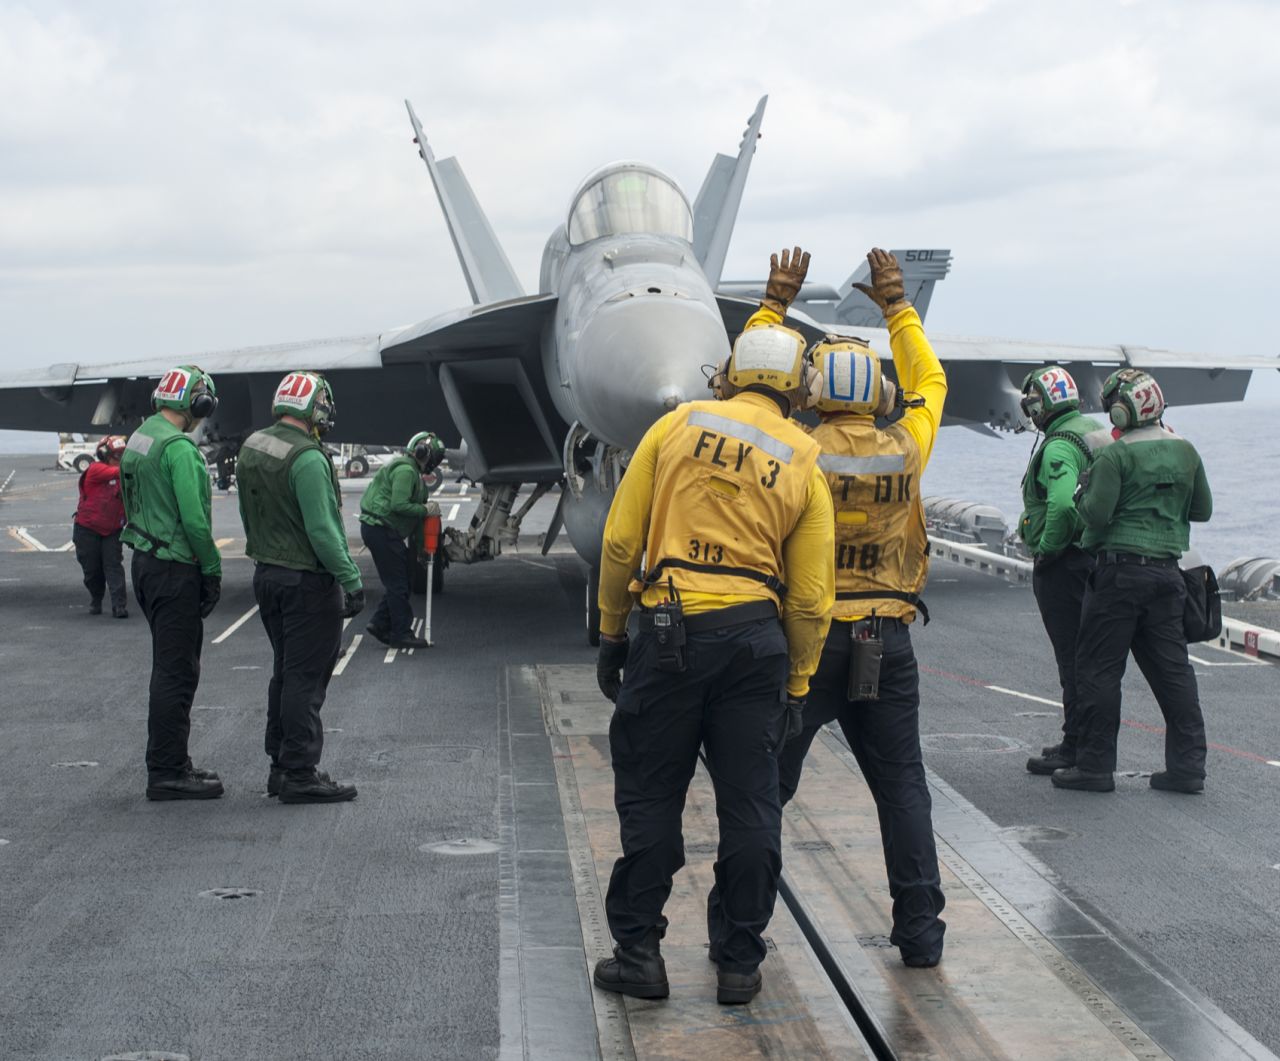 An F/A-18E Super Hornet from the Sunliners of Strike Fighter Squadron 81 taxis onto a catapult before launching from the flight deck of the aircraft carrier USS Carl Vinson.